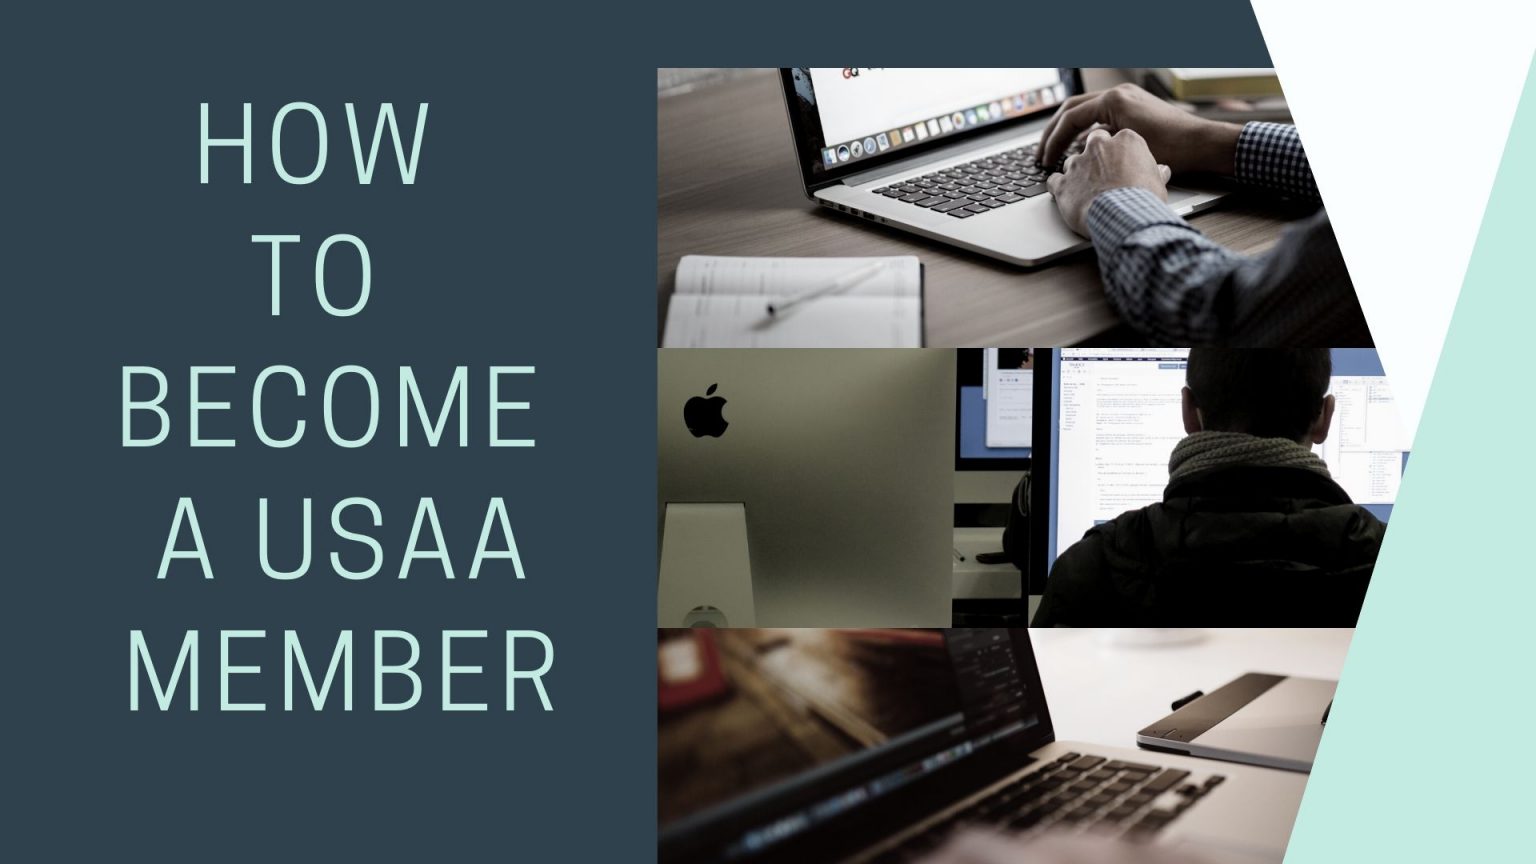 How To A USAA Member Step by Step Guide